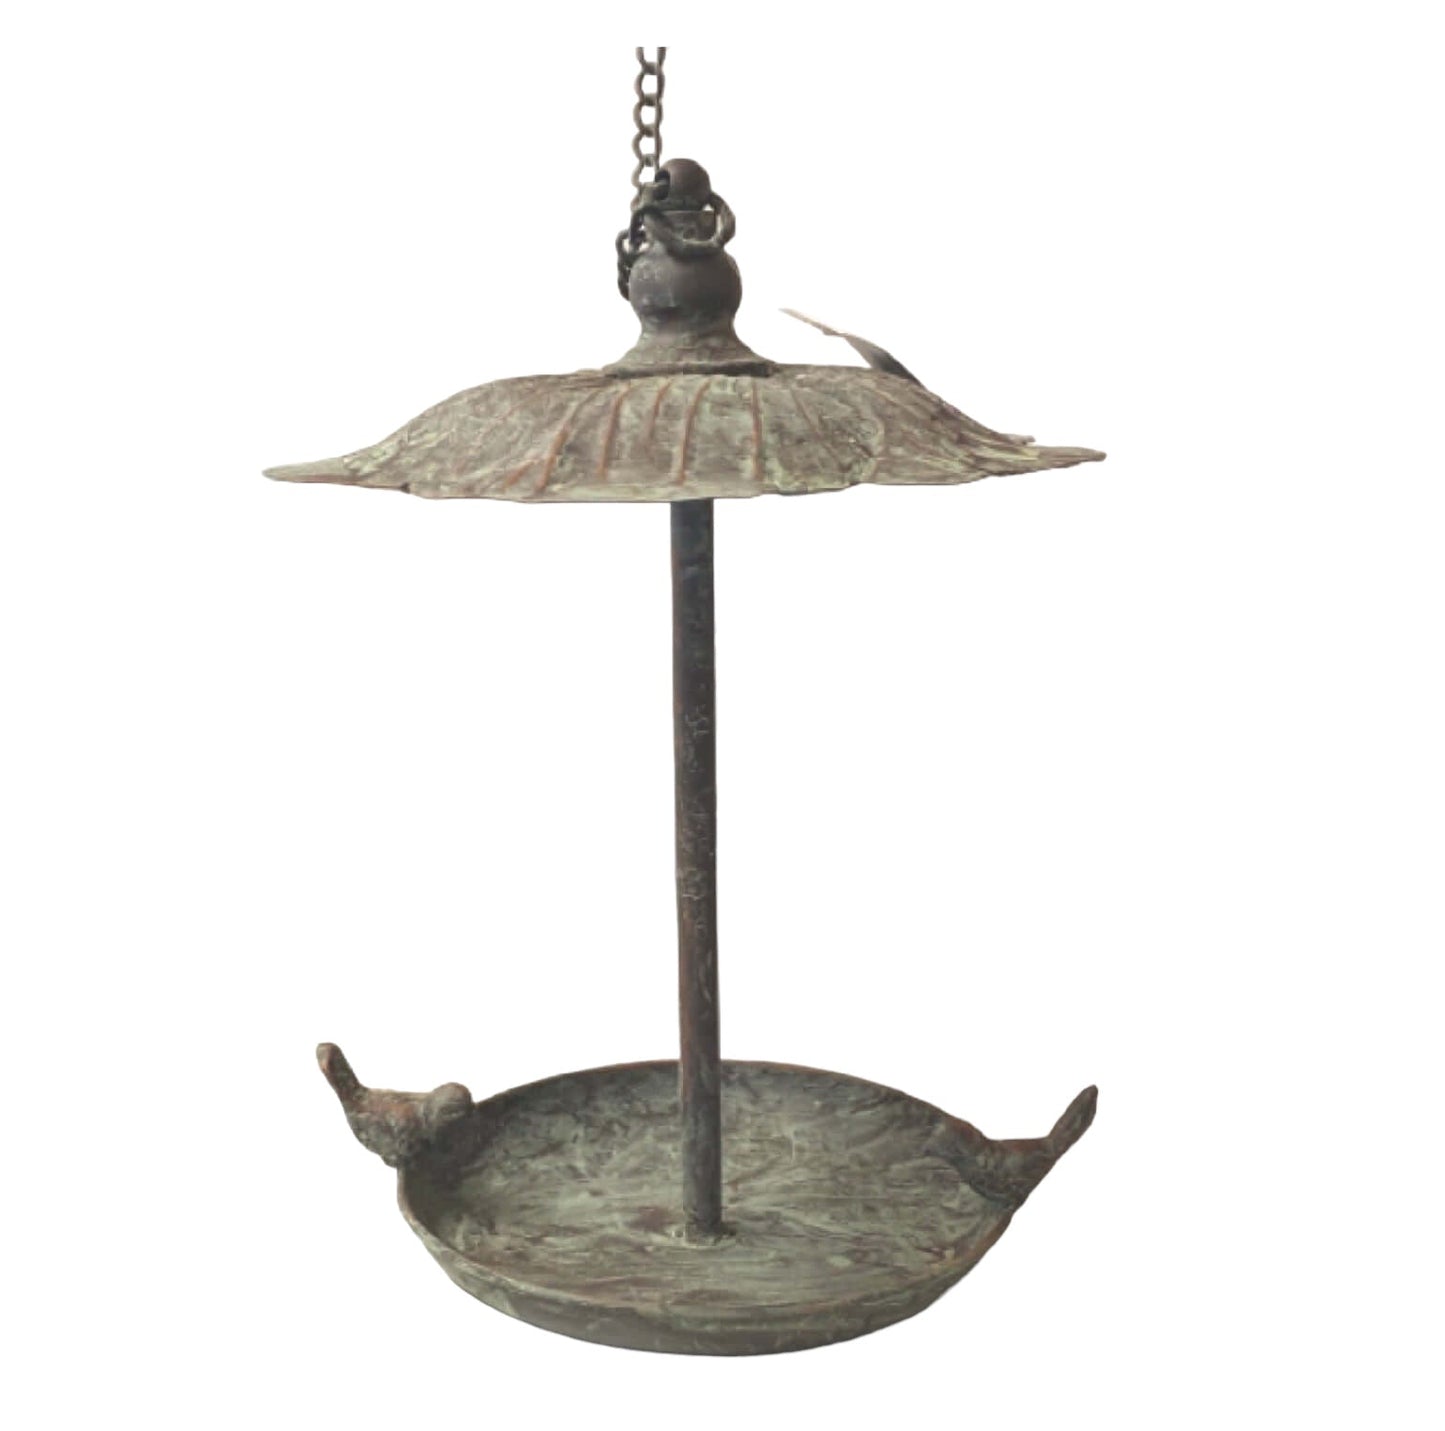 Bird Feeder Hanging Leaf with Birds - The Renmy Store Homewares & Gifts 